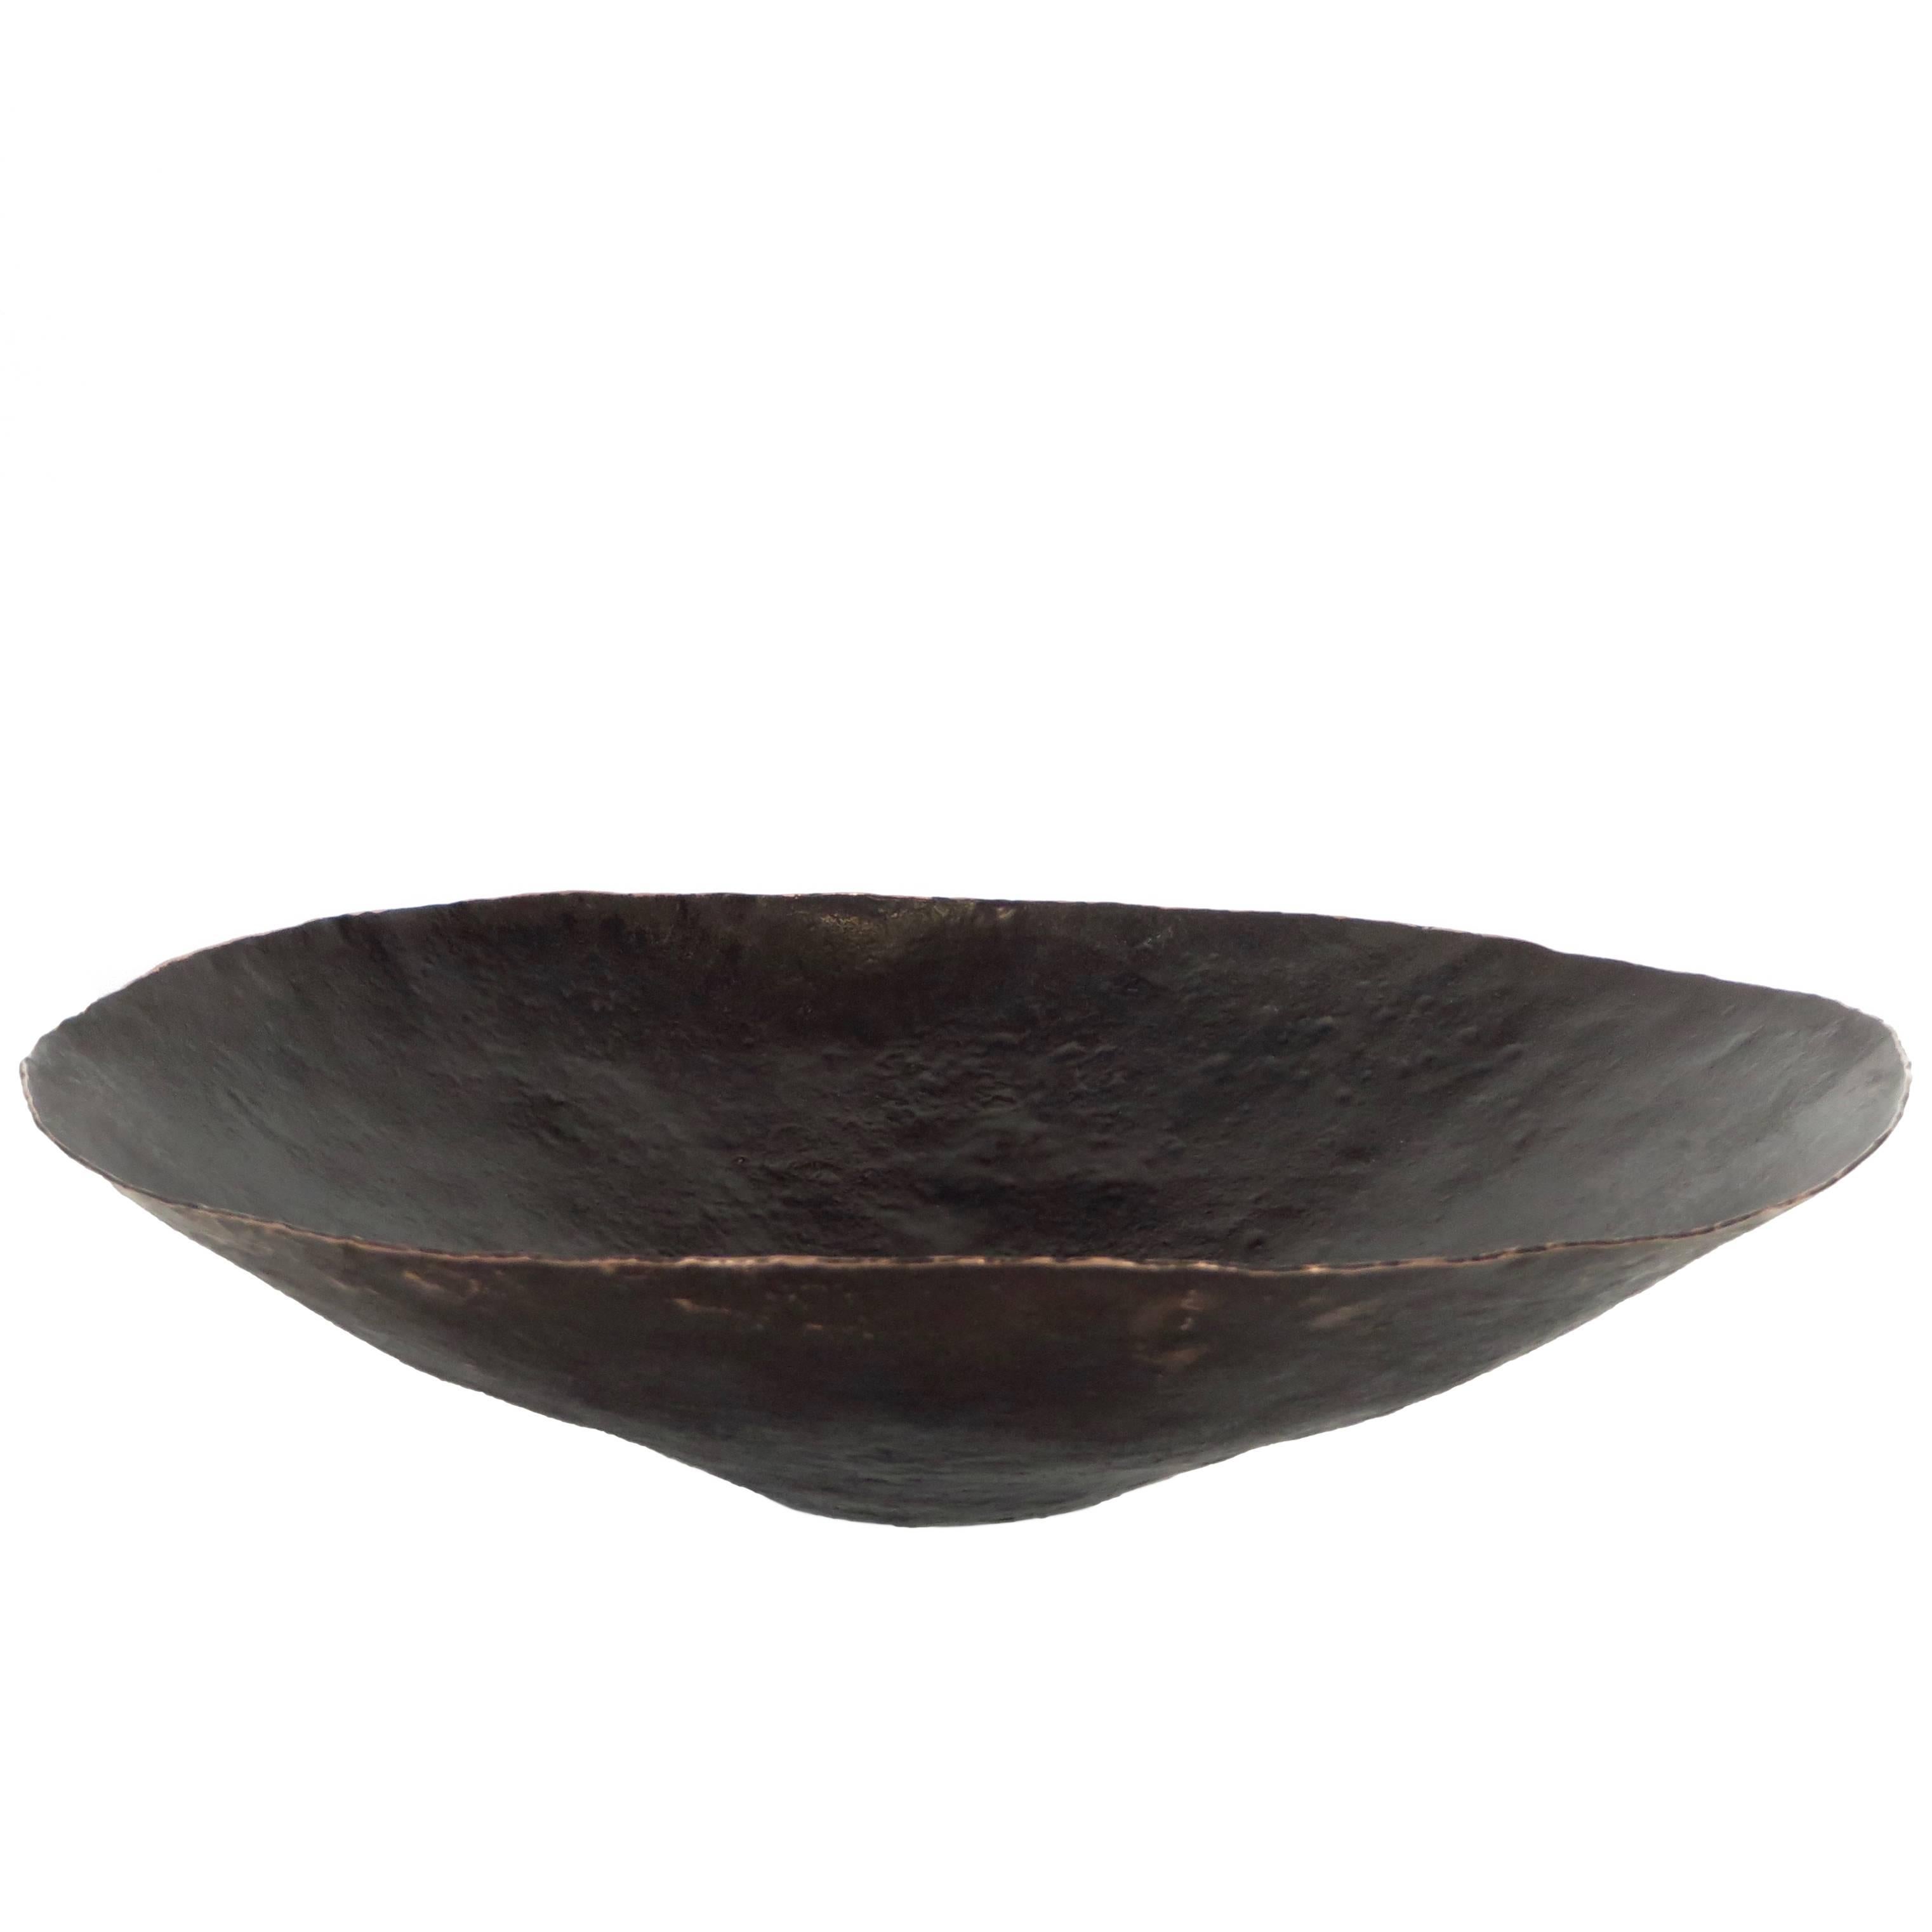 Hand-Hammered Contemporary Copper Bowl by Hvnter Gvtherer